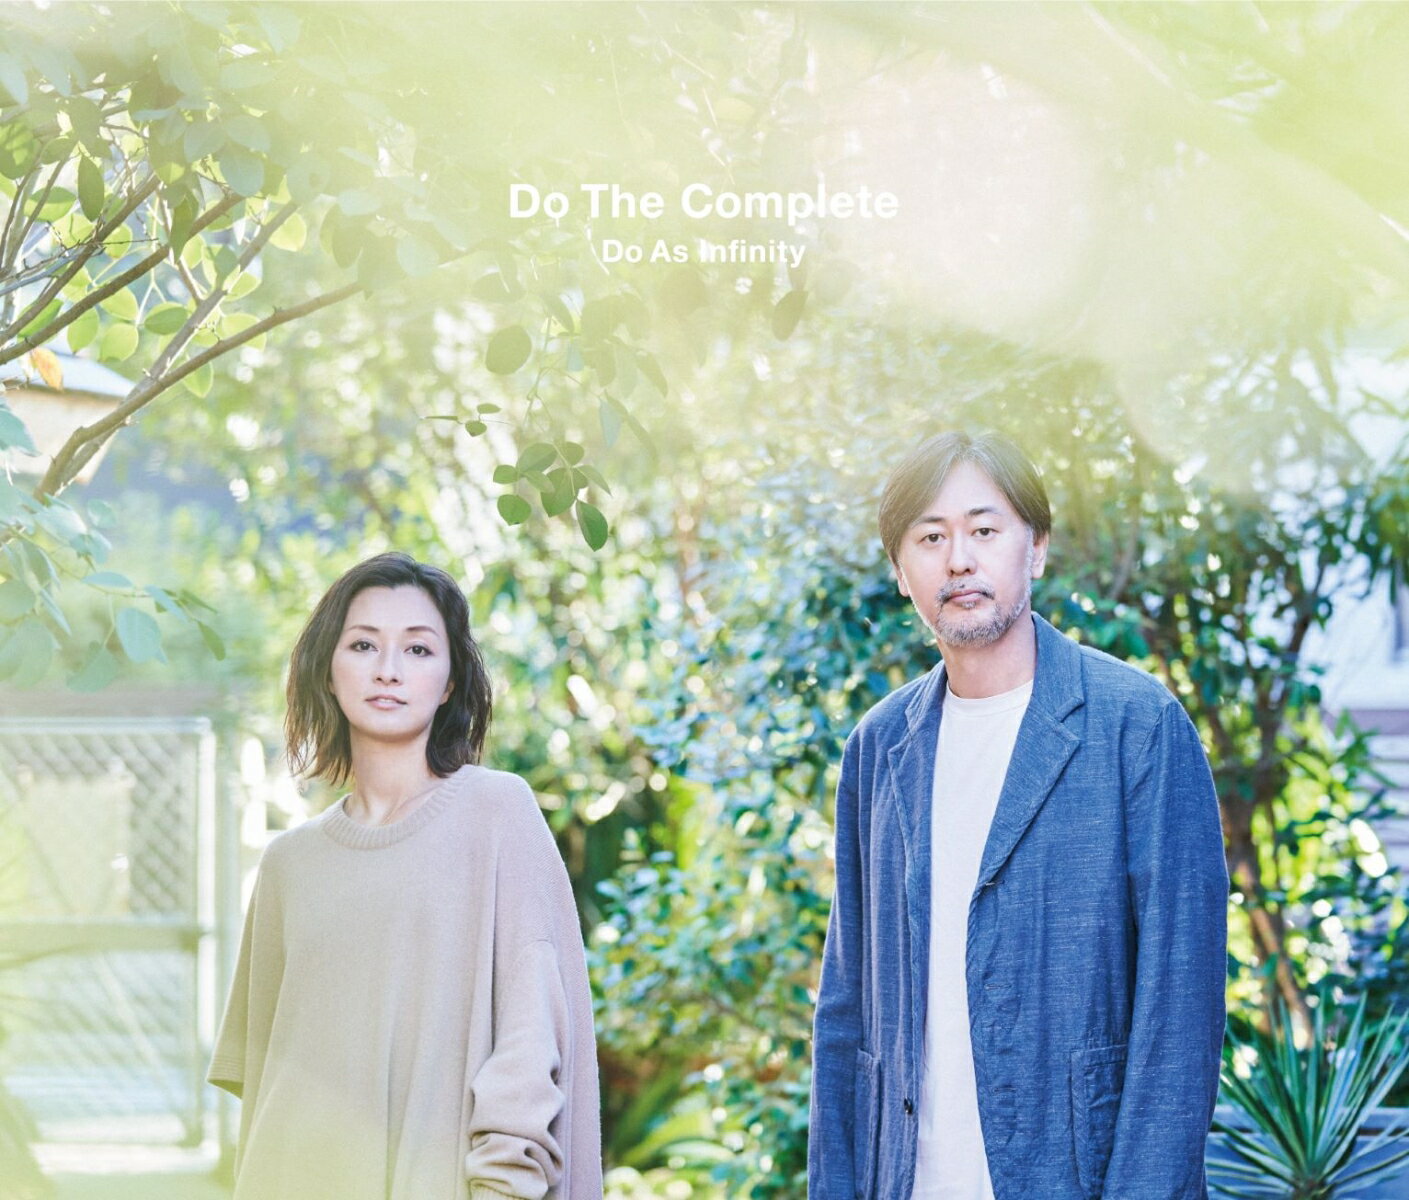 Do The Complete (3CD＋Blu-ray＋スマプラ) [ Do As Infinity ]